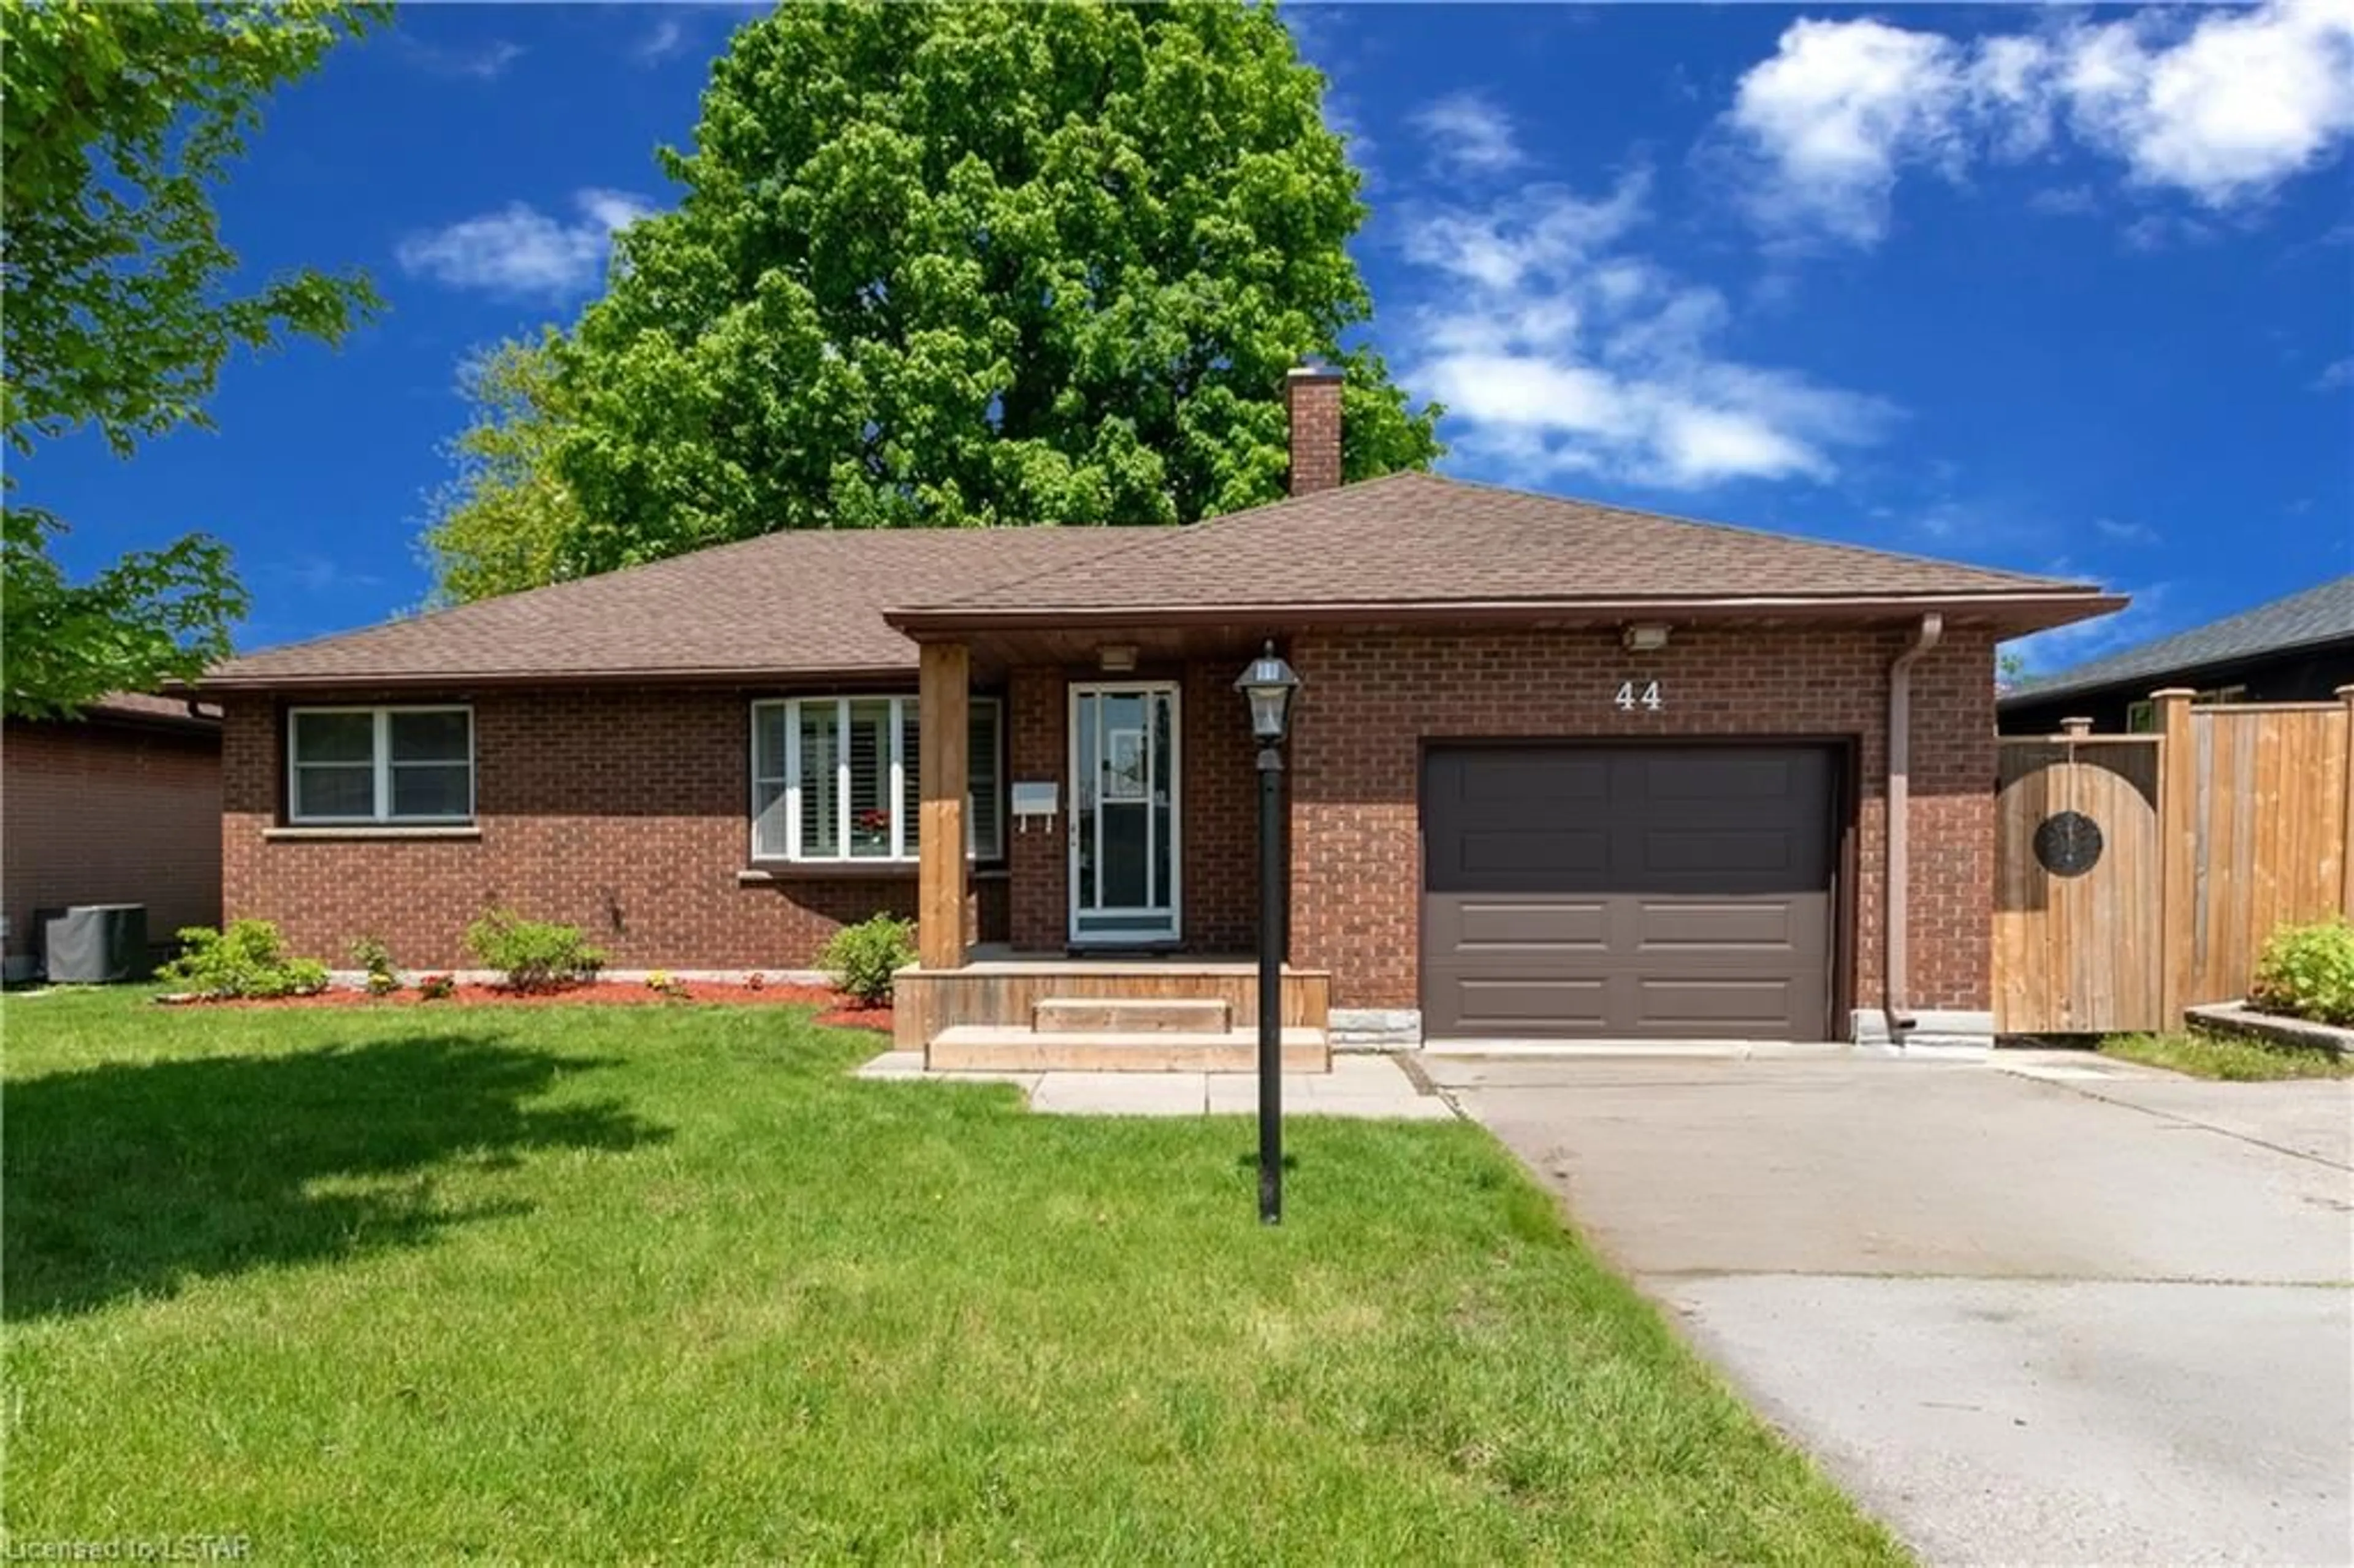 Home with brick exterior material for 44 Tweedsmuir Ave, London Ontario N5W 1K7